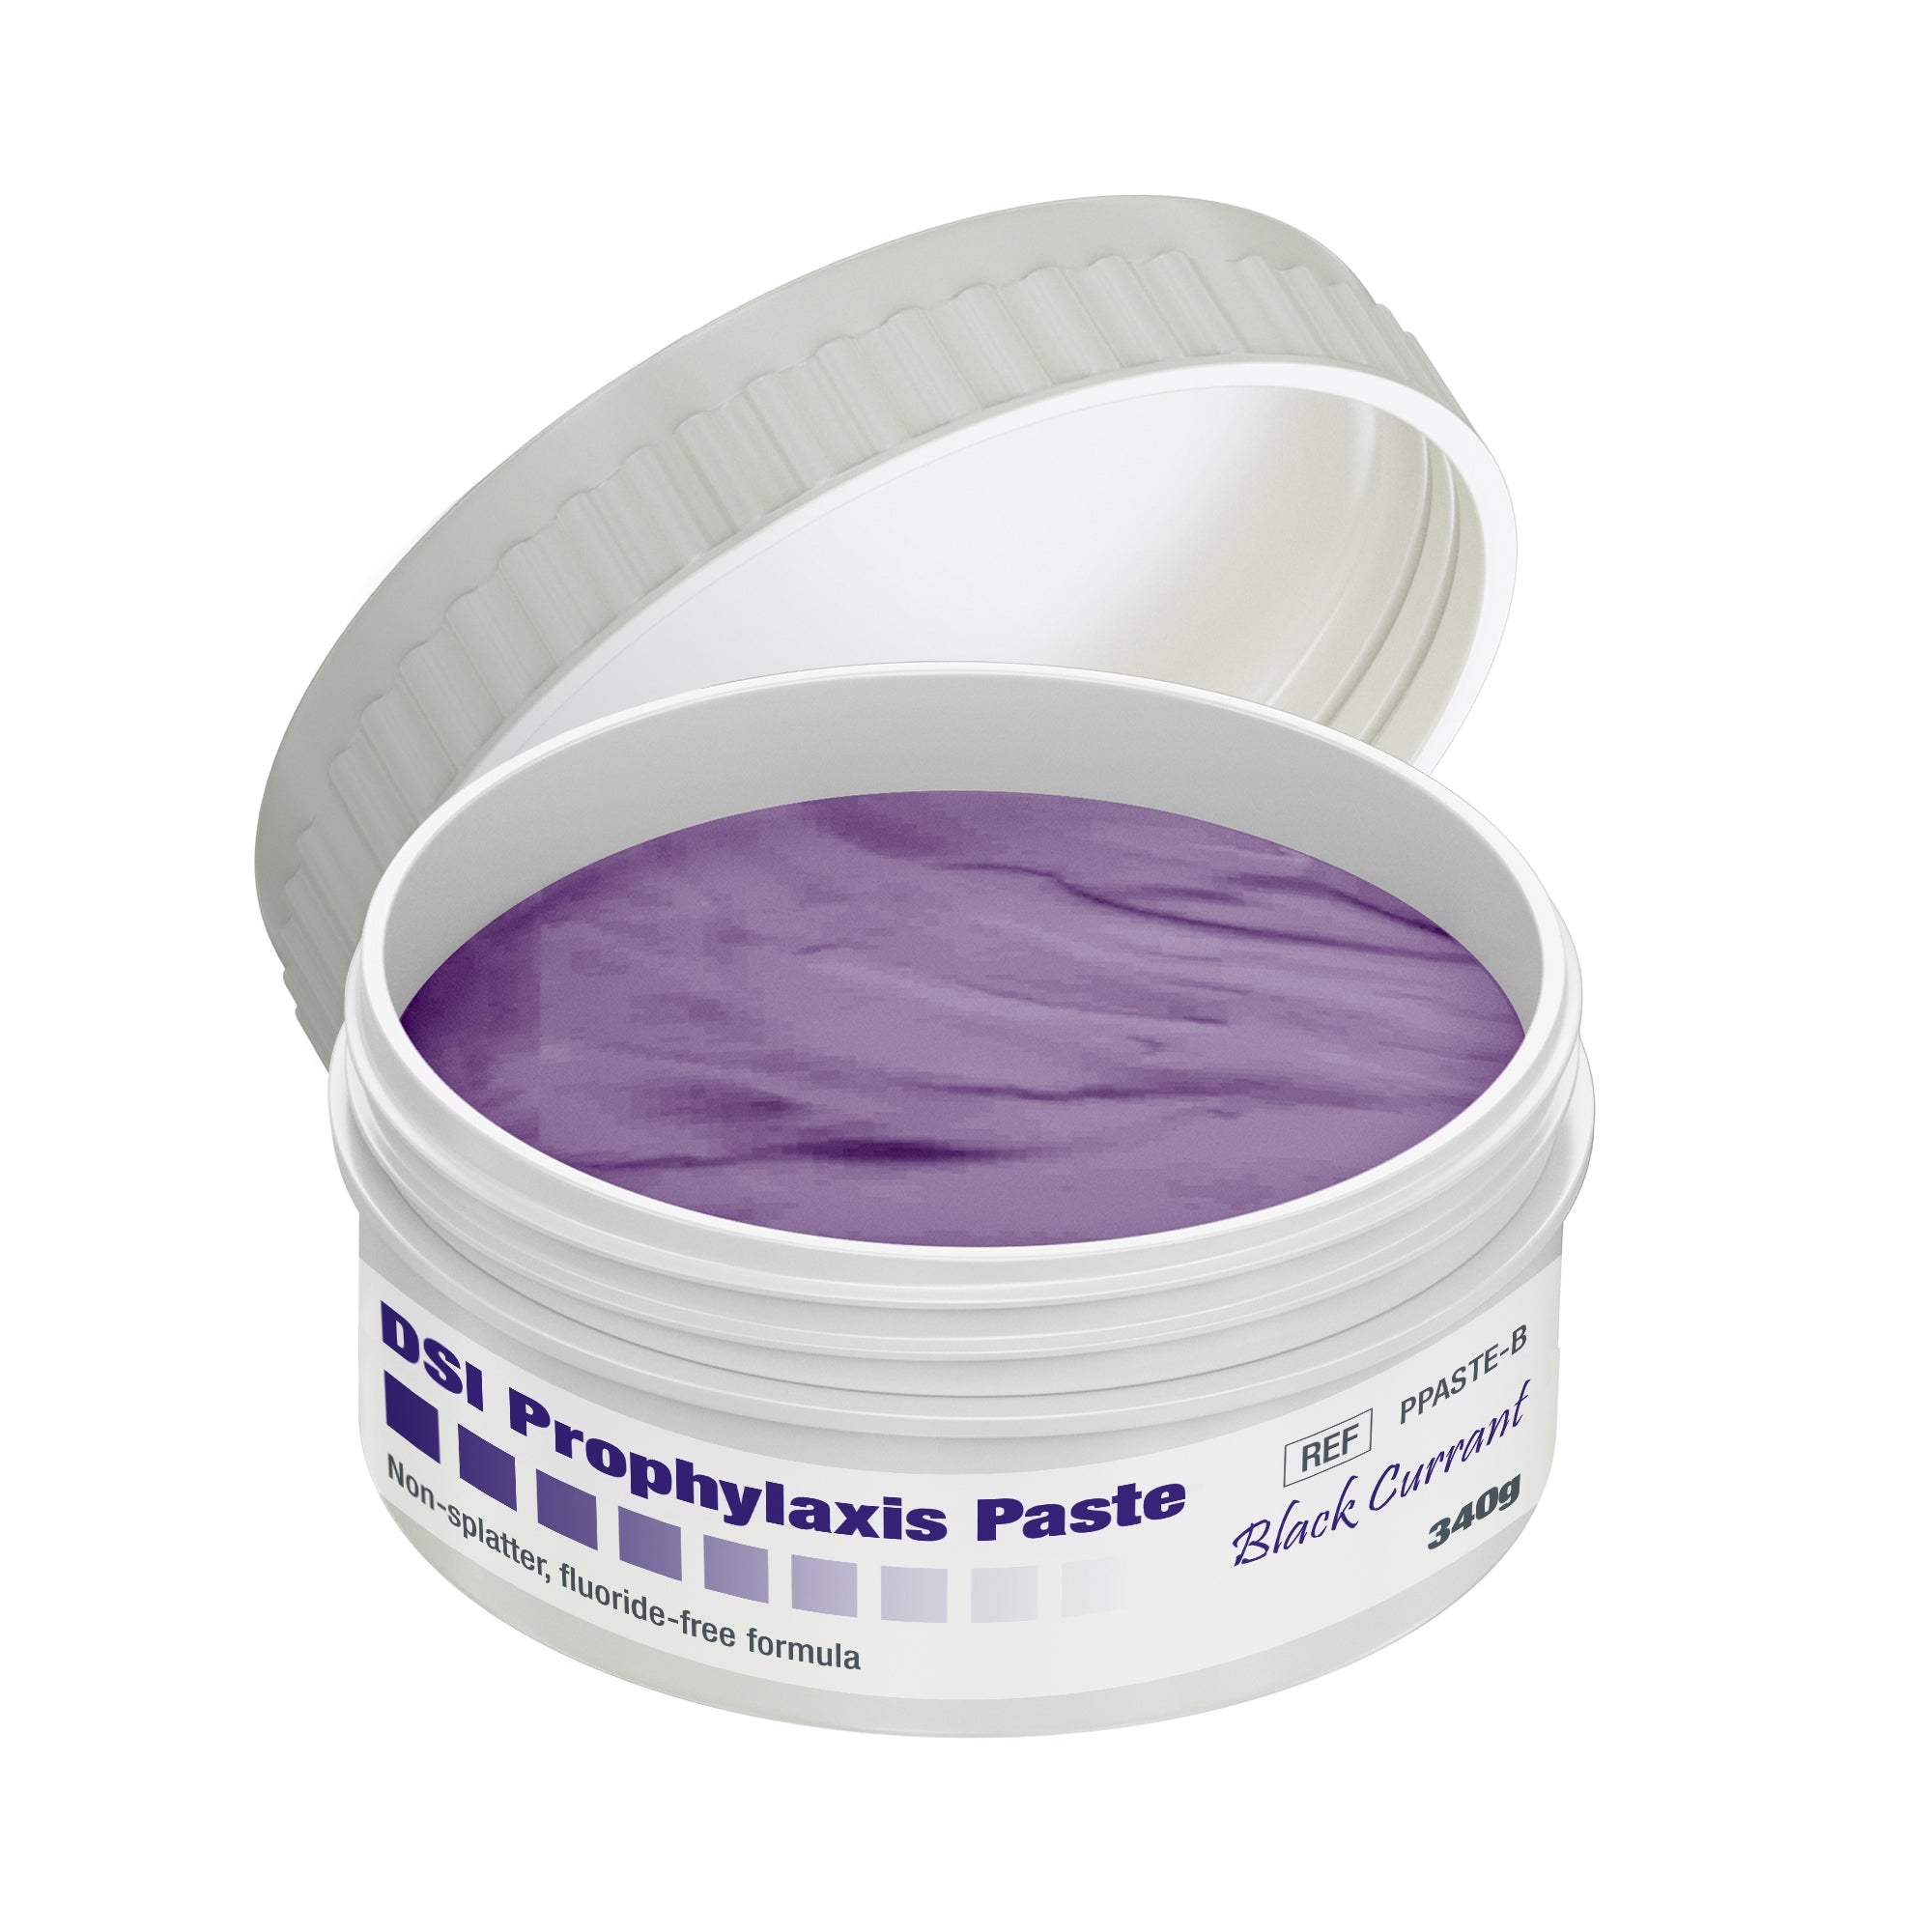 DSI Prophylaxis Paste (Prophy Paste) For Teeth Cleaning 340g 12oz